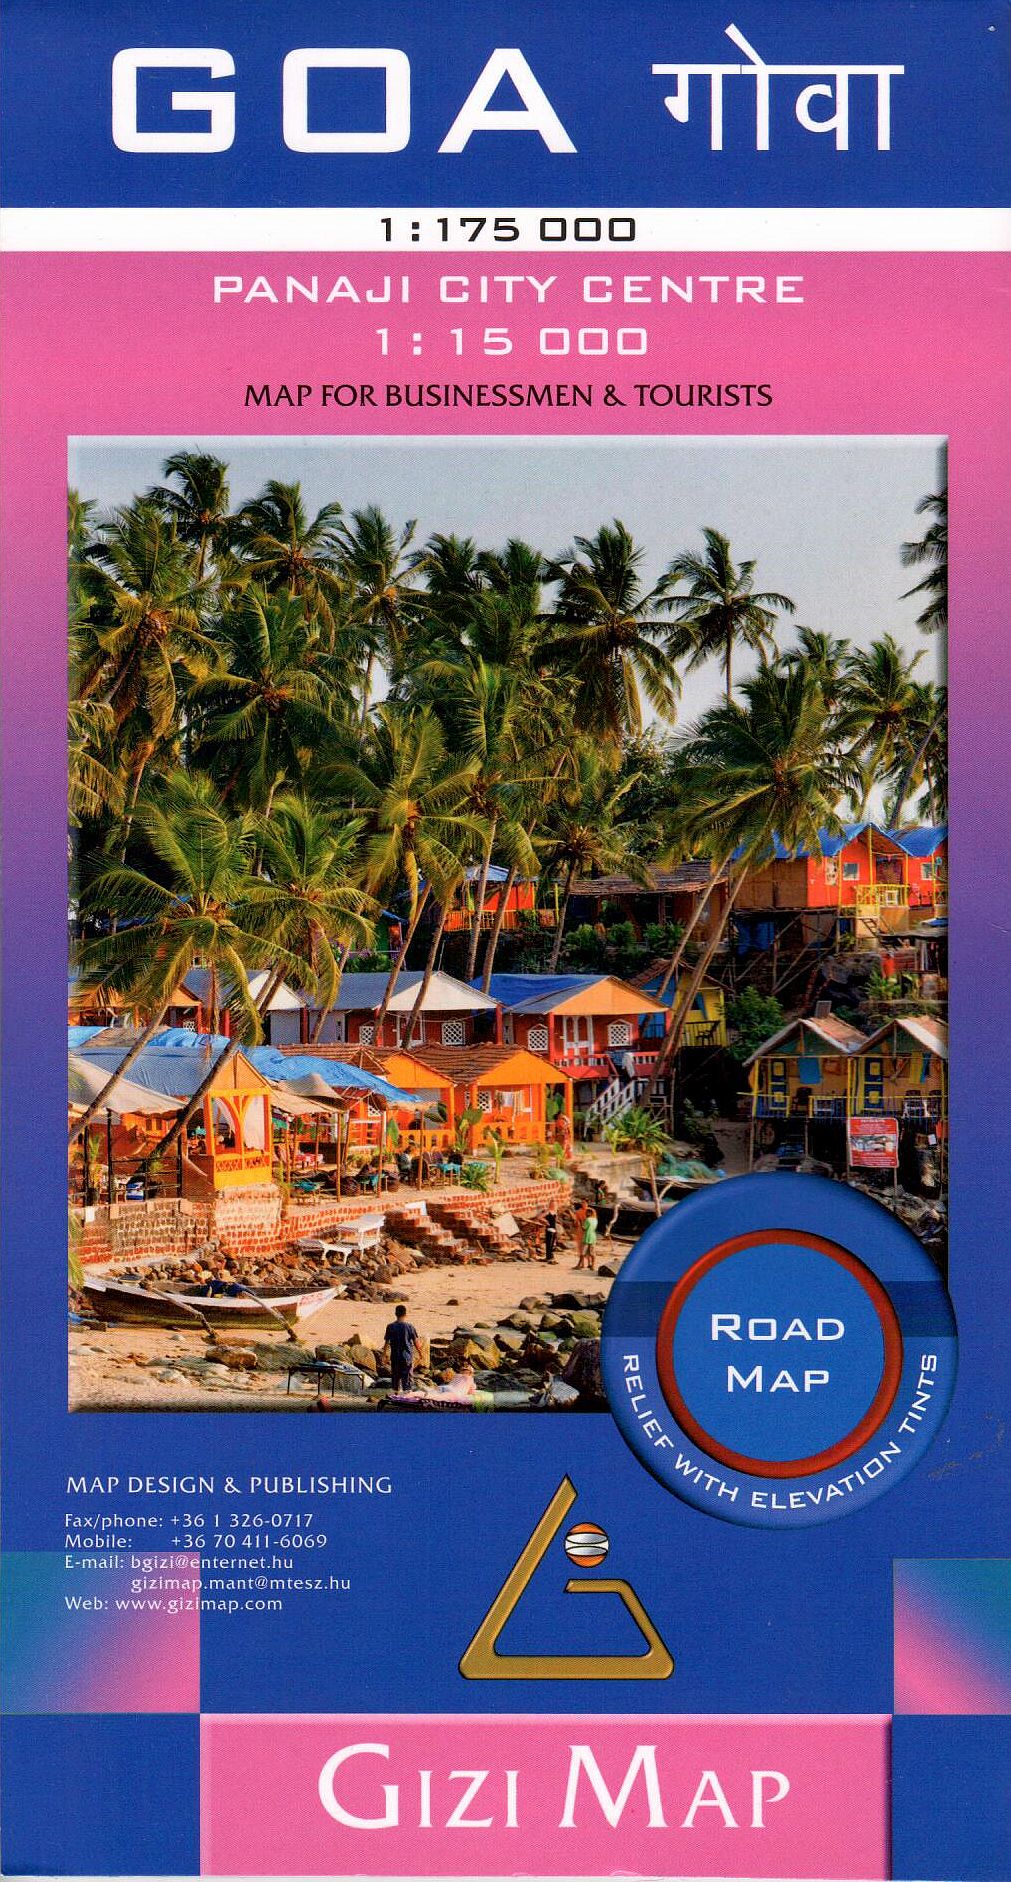  Goa geographical map with tourist and road information